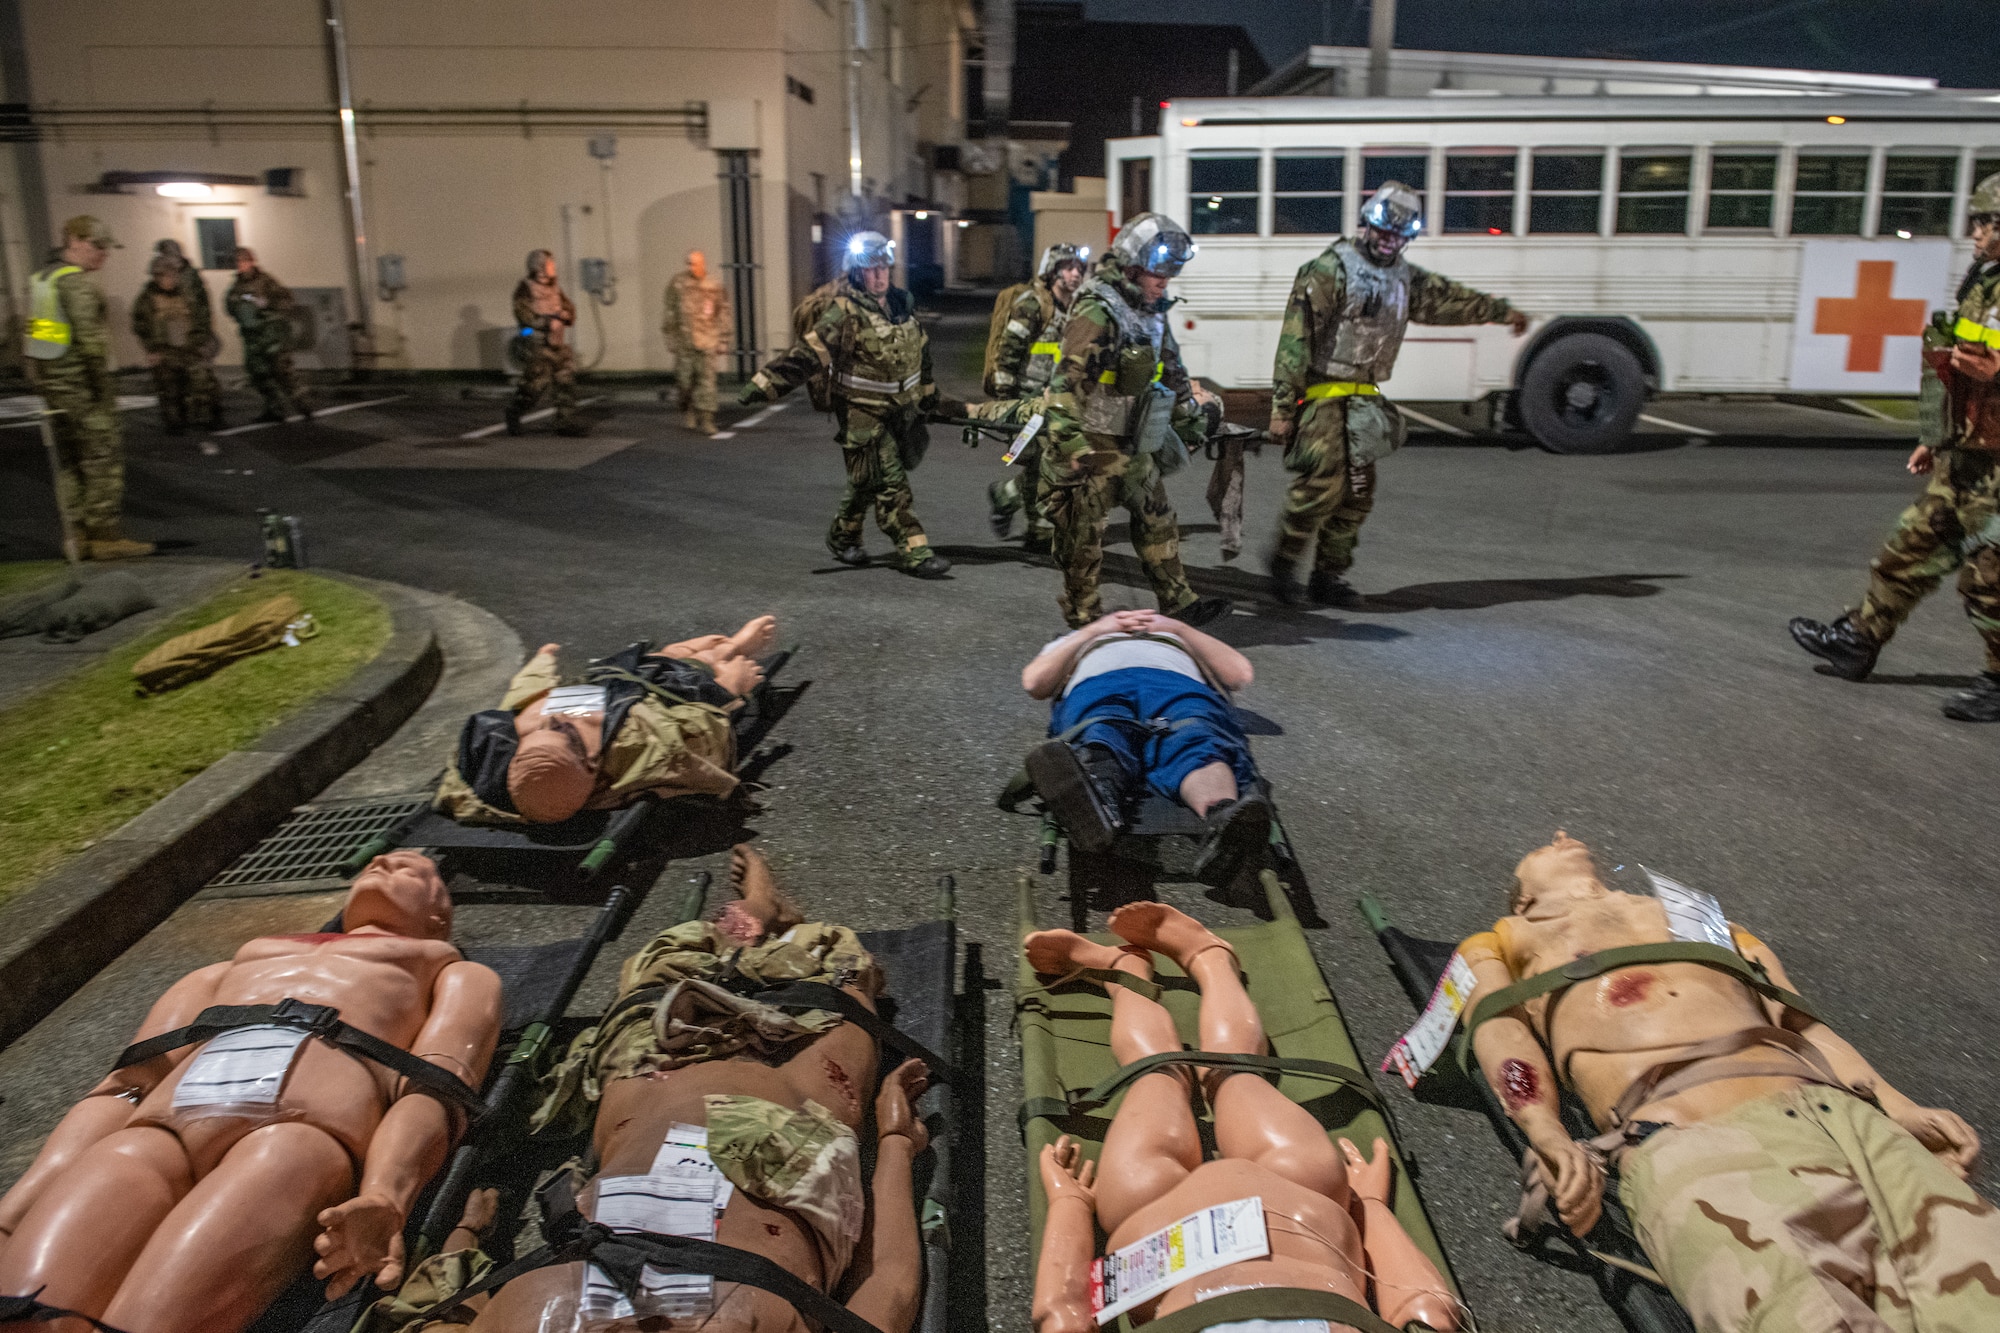 a medical bus in front of several stretchers on the ground with dummies